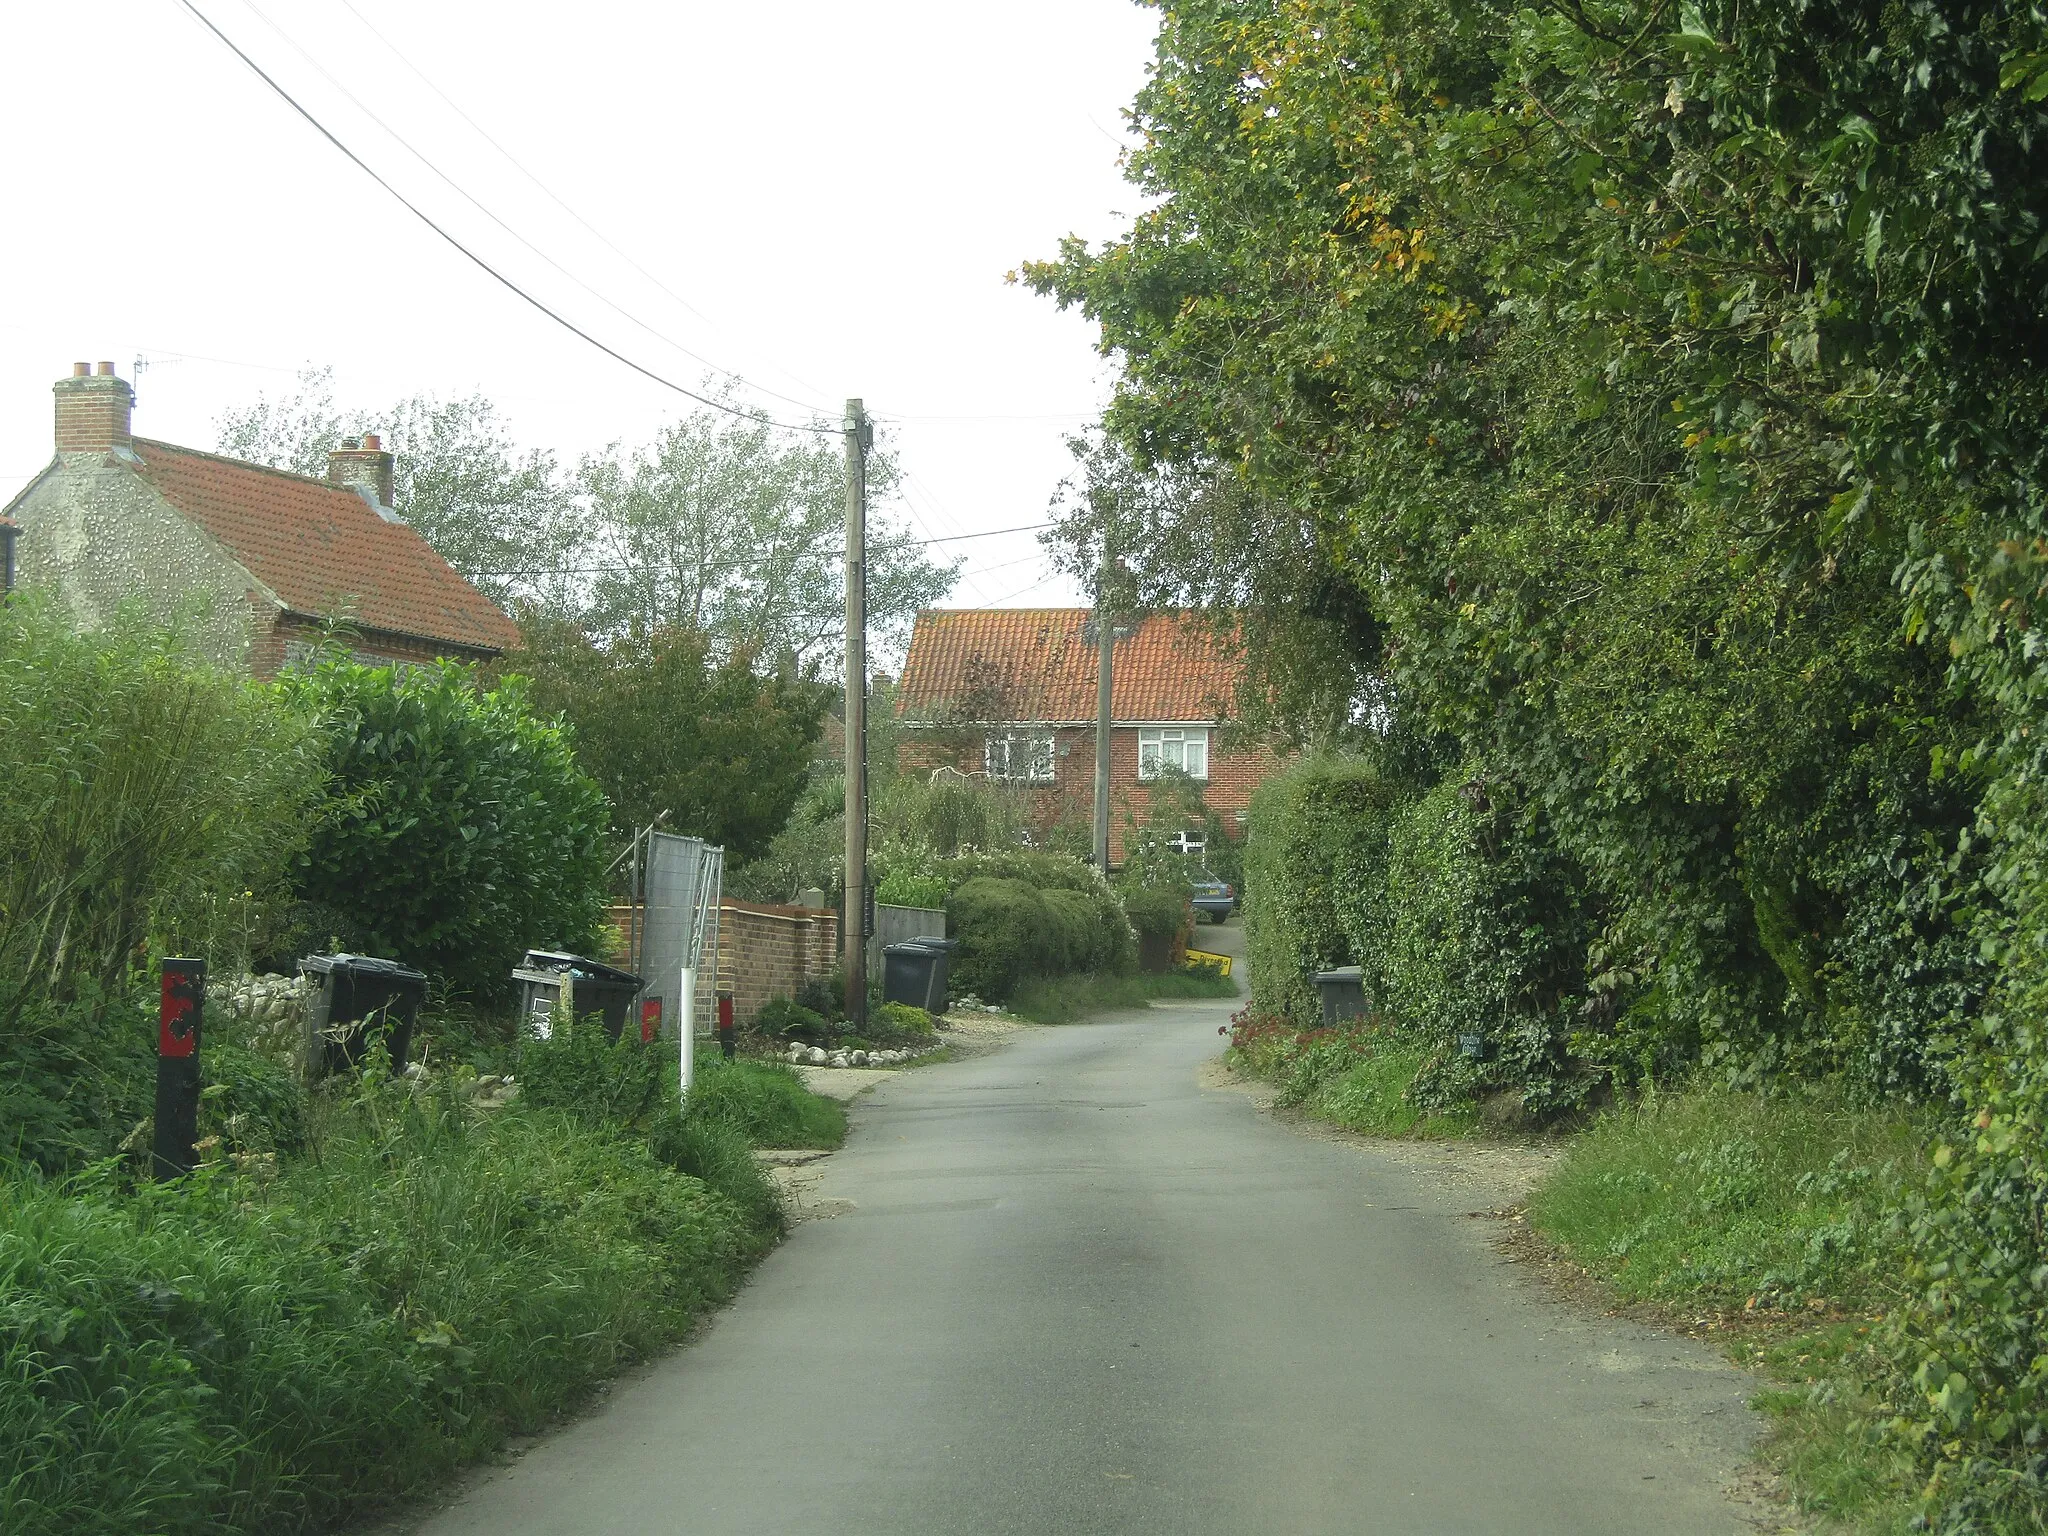 Photo showing: Looking west along ΄The Street΄ in the village of Aylmerton, Norfolk, England.